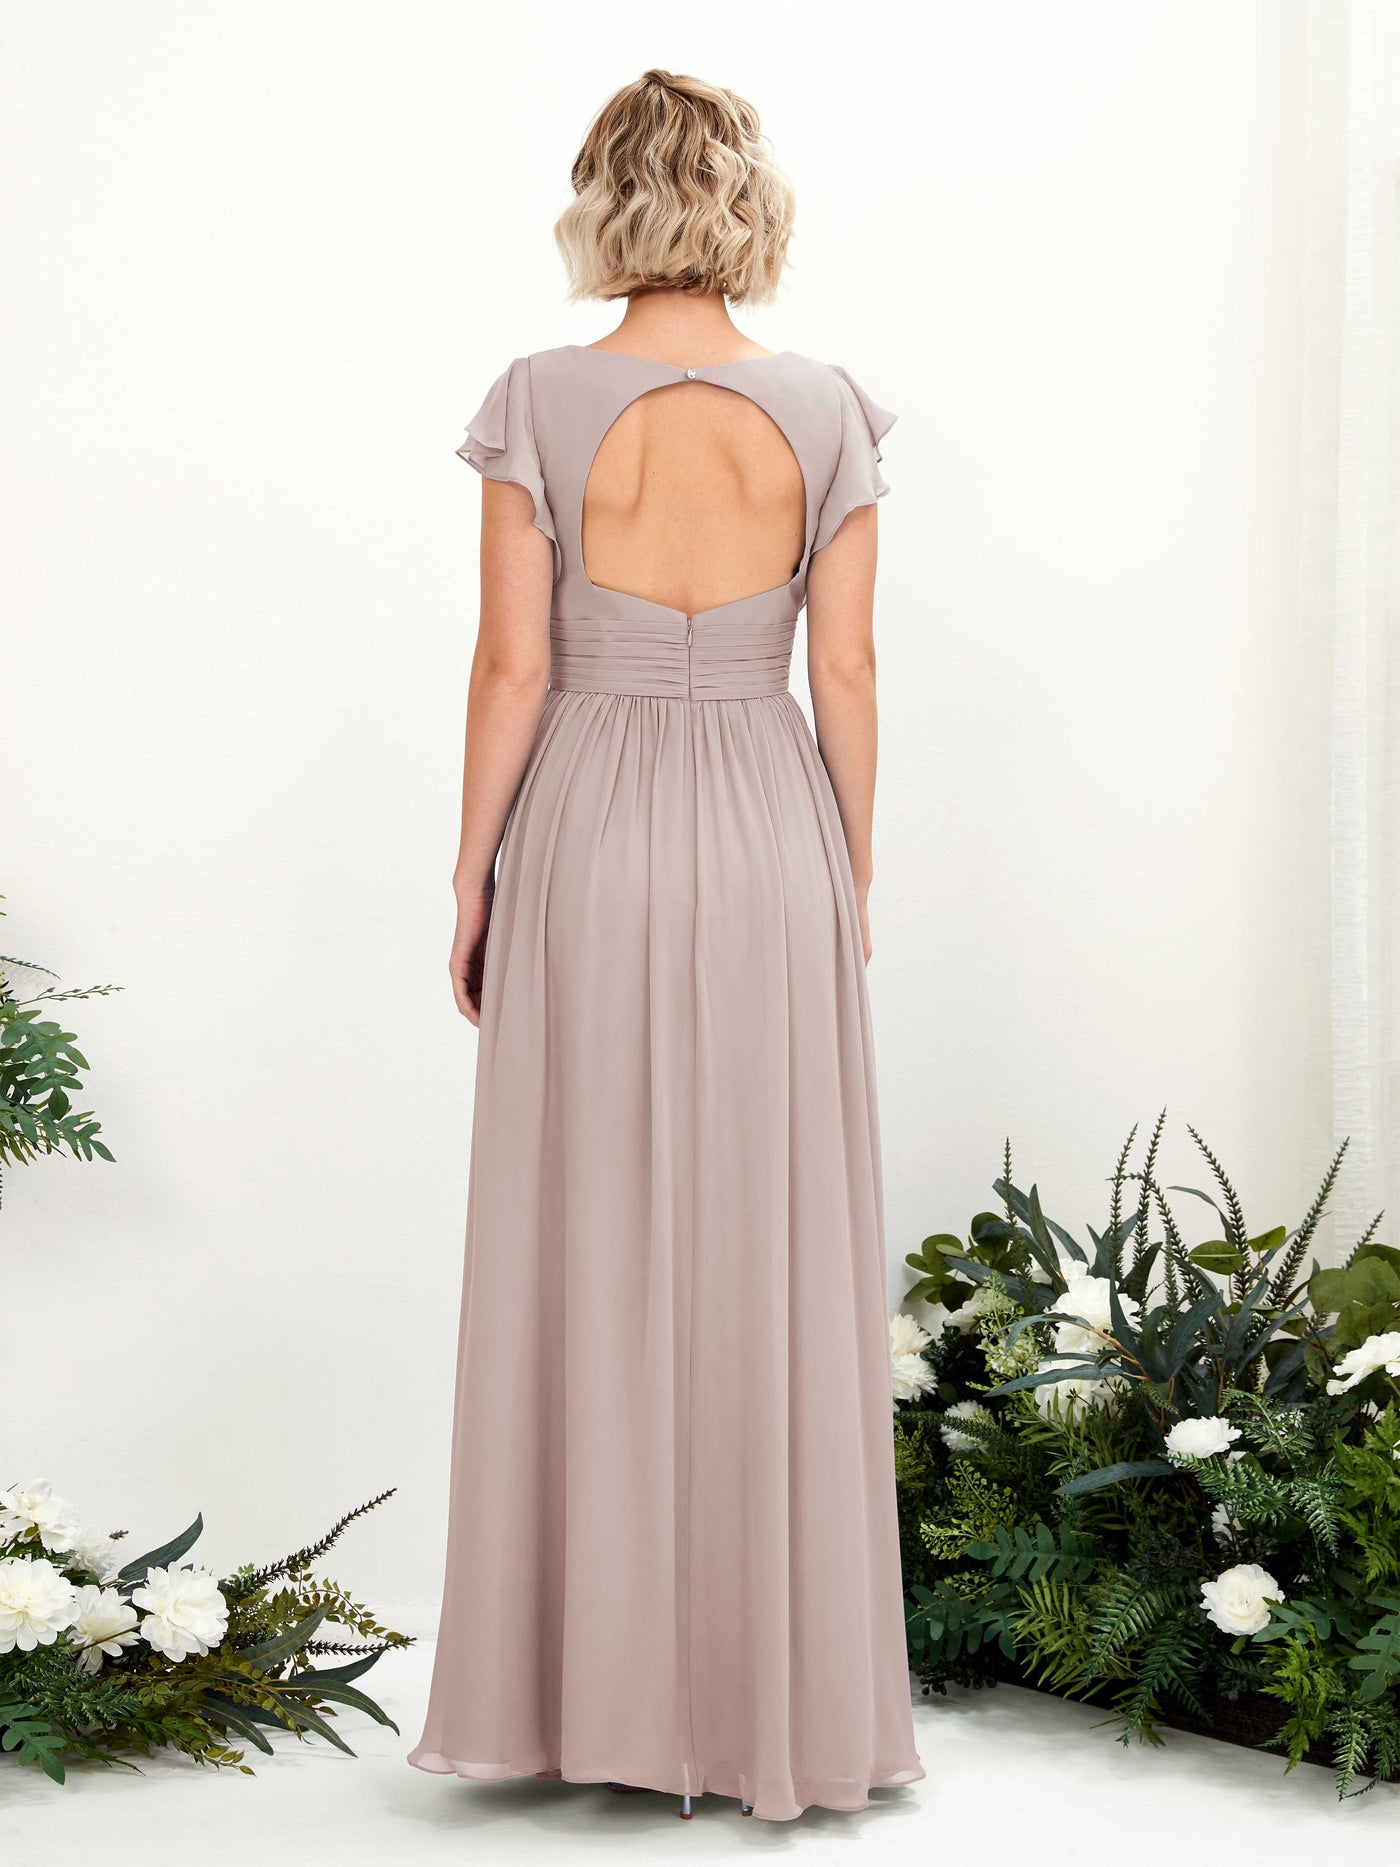 Taupe Bridesmaid Dresses Bridesmaid Dress A-line Chiffon V-neck Full Length Short Sleeves Wedding Party Dress (81222724)#color_taupe